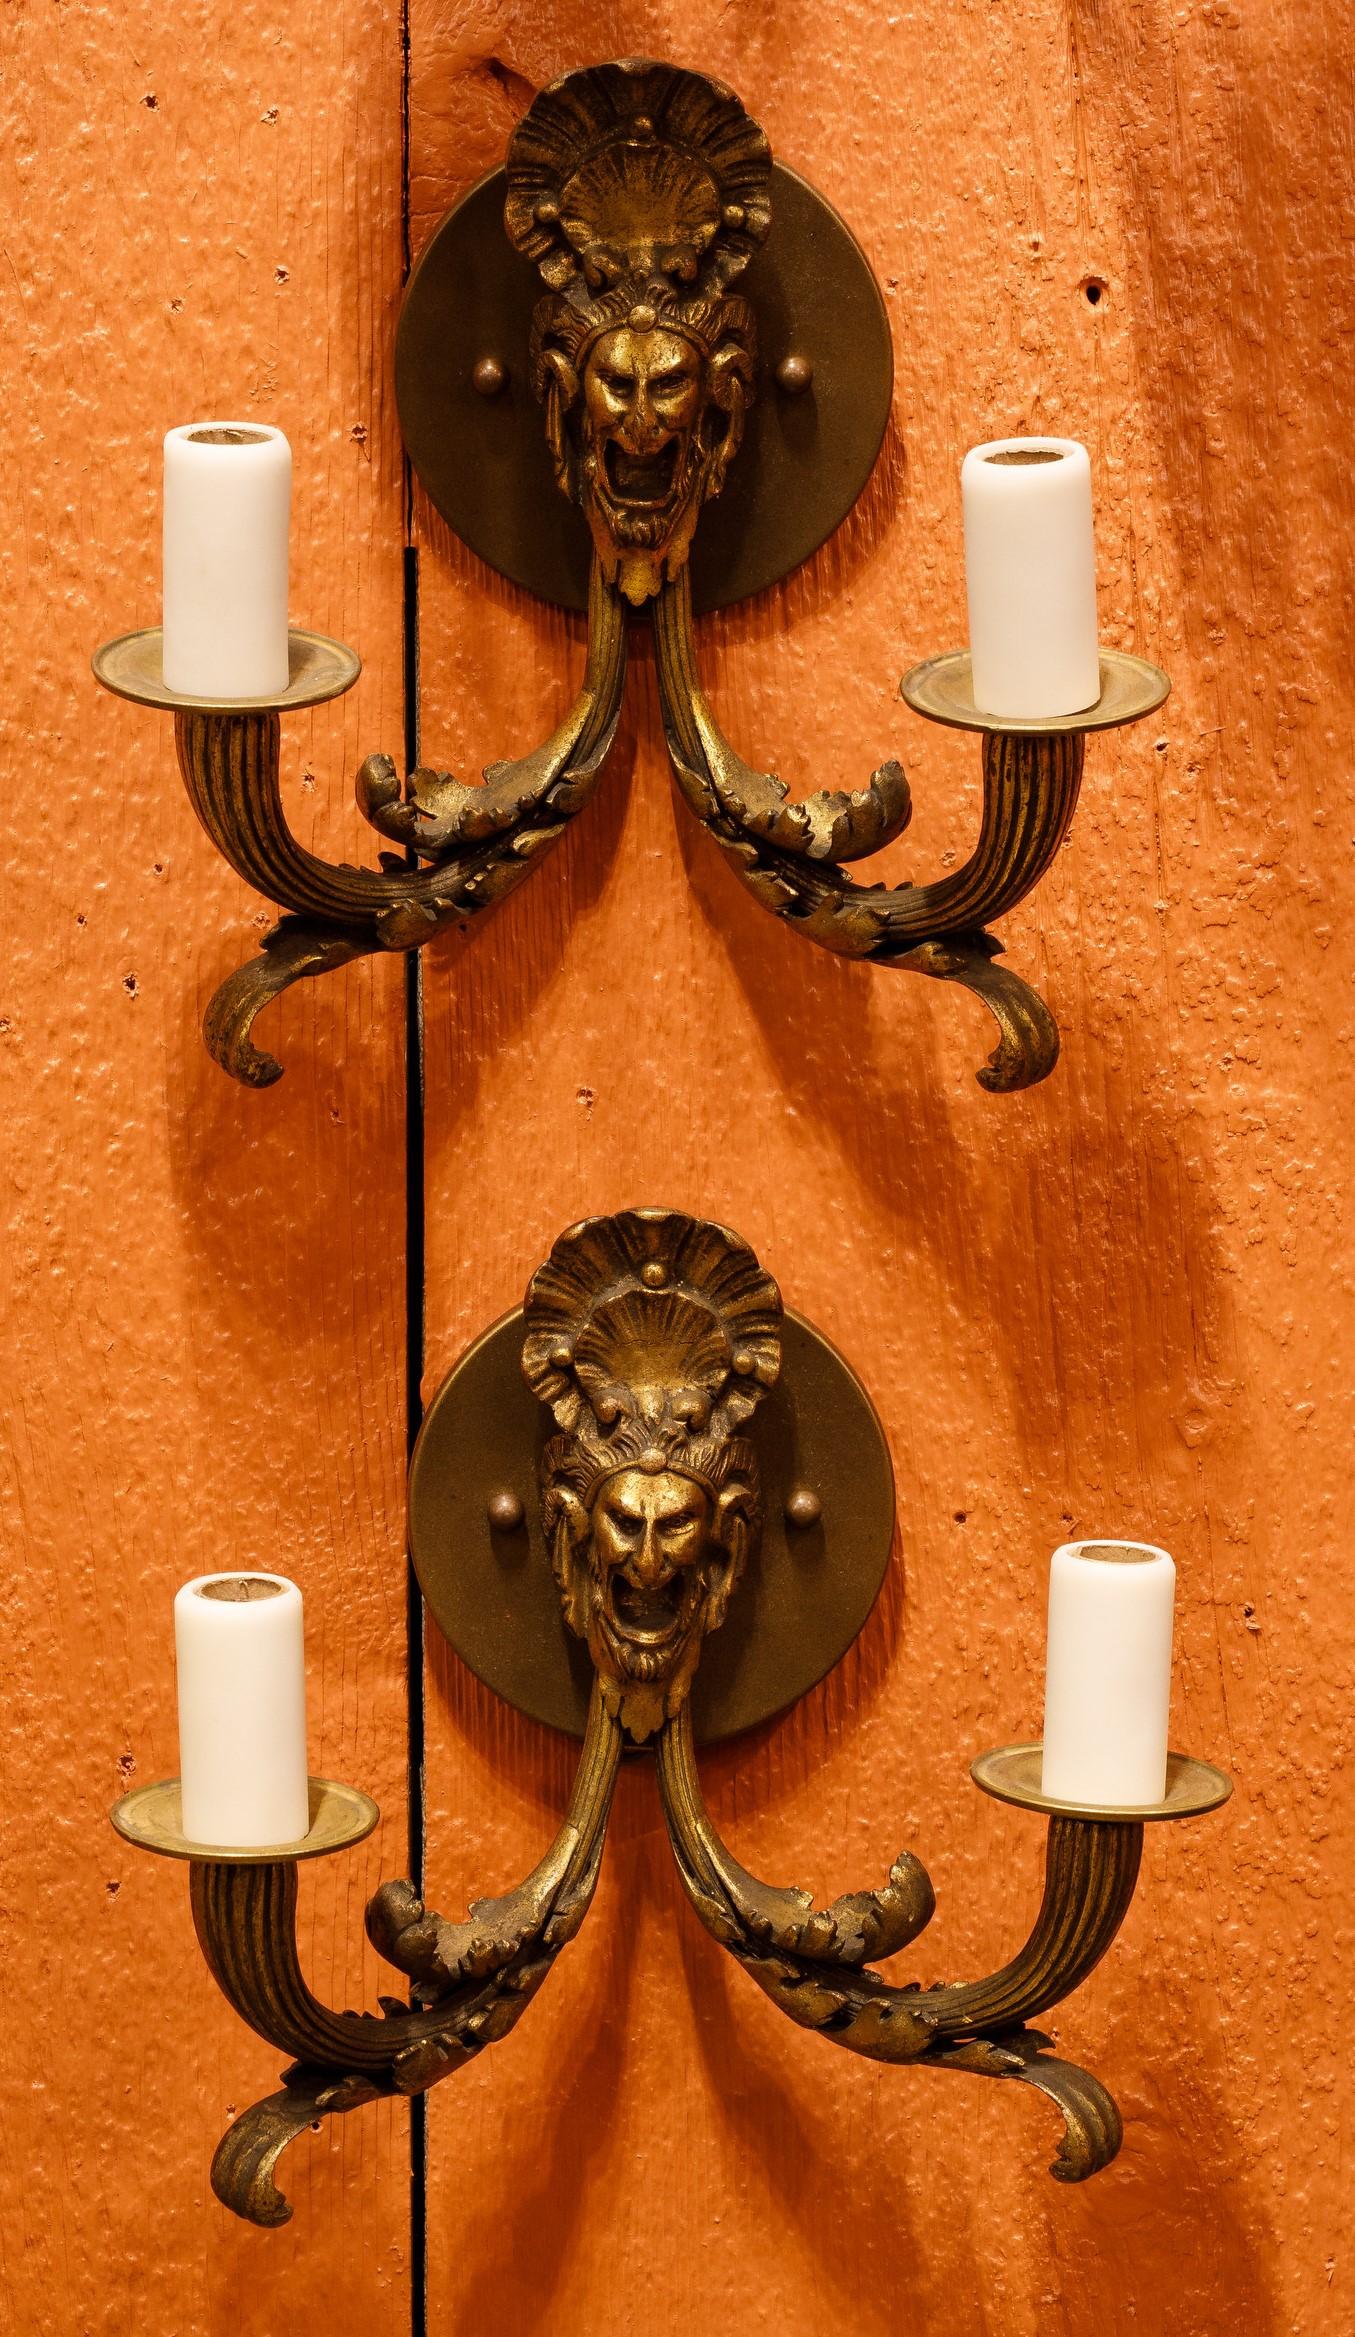 This pair of 2-arm antique bronze sconces has deep castings of fine quality  Their classic design is suitable for many rooms in a home.  The arms have beautiful castings of leaves and the center of the sconces have faces of Bacchus of Dyonysus.  The